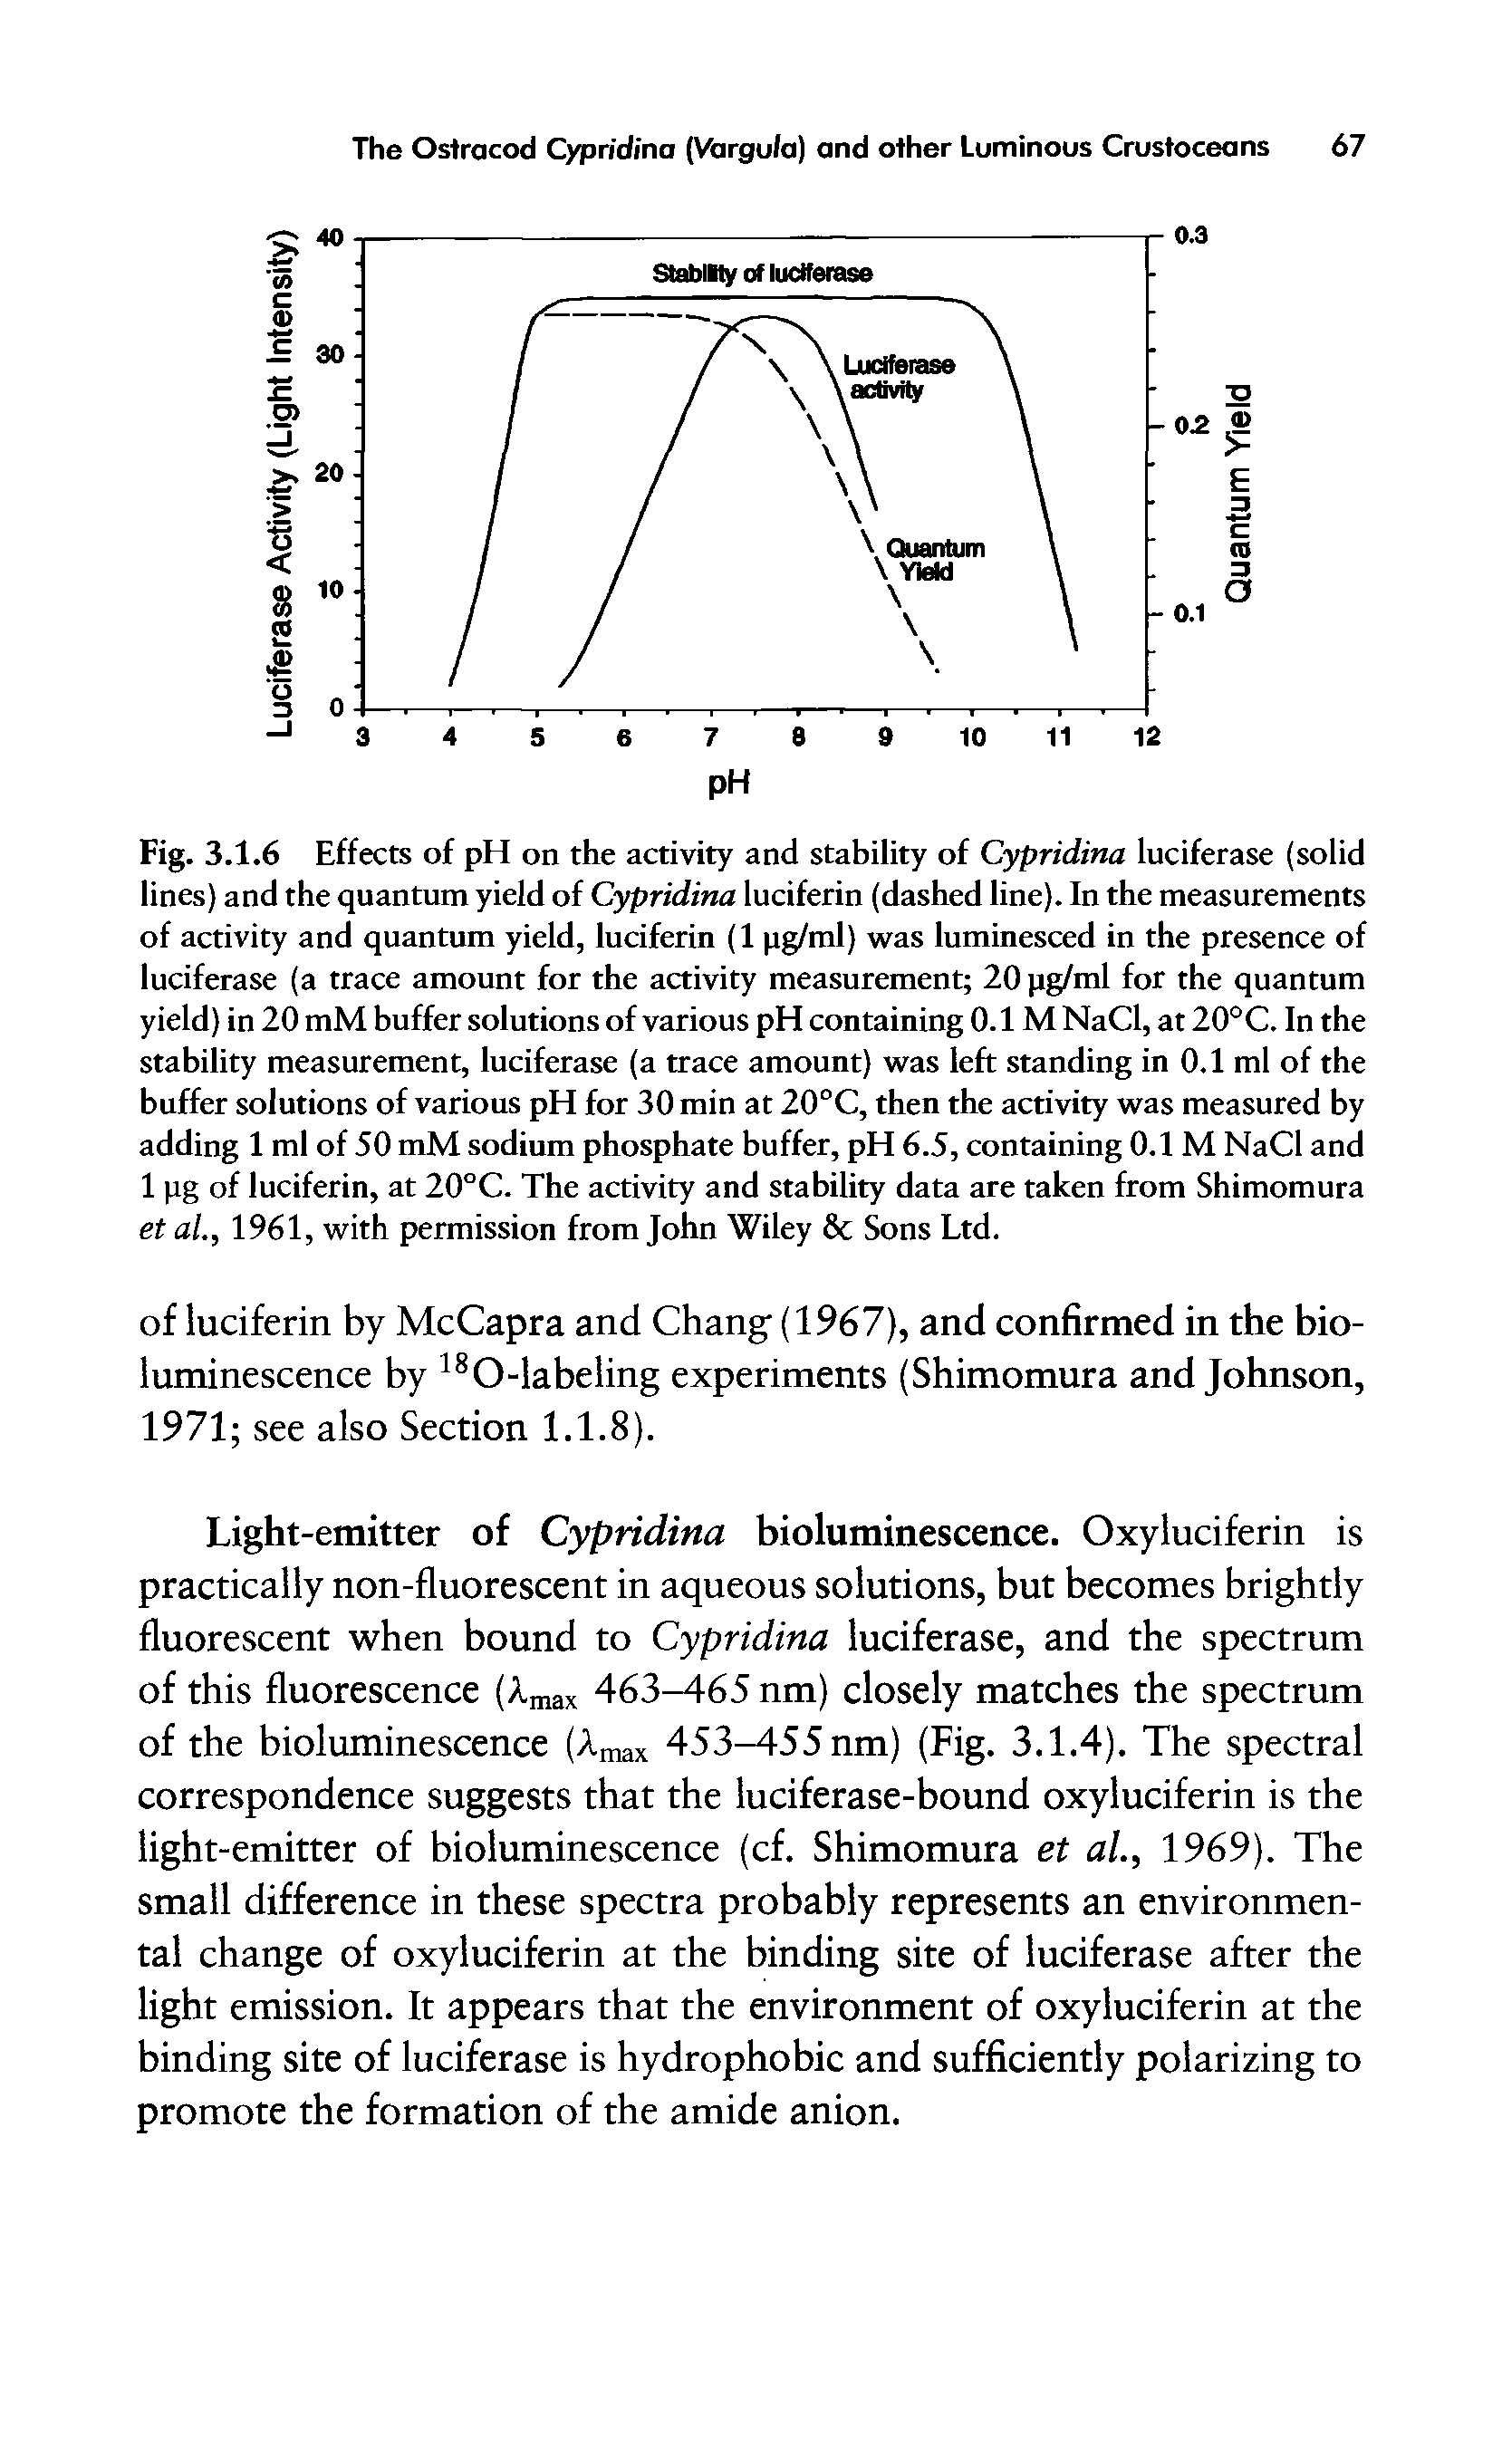 Fig. 3.1.6 Effects of pH on the activity and stability of Cypridina luciferase (solid lines) and the quantum yield of Cypridina luciferin (dashed line). In the measurements of activity and quantum yield, luciferin (1 pg/ml) was luminesced in the presence of luciferase (a trace amount for the activity measurement 20 pg/ml for the quantum yield) in 20 mM buffer solutions of various pH containing 0.1M NaCl, at 20°C. In the stability measurement, luciferase (a trace amount) was left standing in 0.1 ml of the buffer solutions of various pH for 30 min at 20°C, then the activity was measured by adding 1 ml of 50 mM sodium phosphate buffer, pH 6.5, containing 0.1 M NaCl and 1 pg of luciferin, at 20°C. The activity and stability data are taken from Shimomura et al., 1961, with permission from John Wiley 8c Sons Ltd.